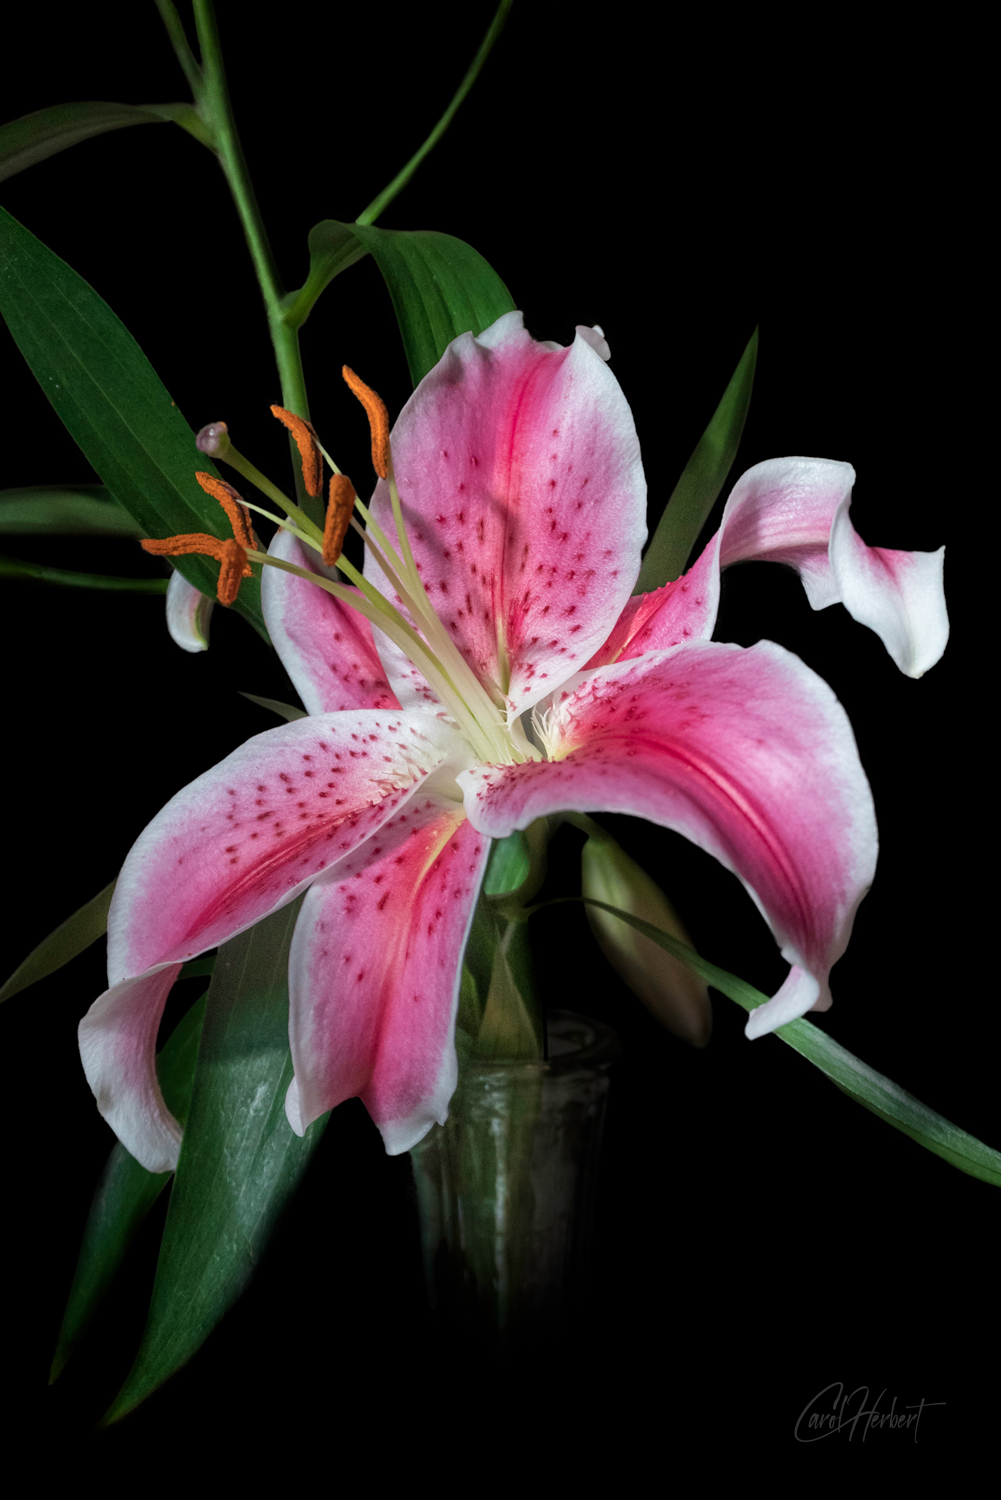 Photograph of a Pink Stargazer Lily